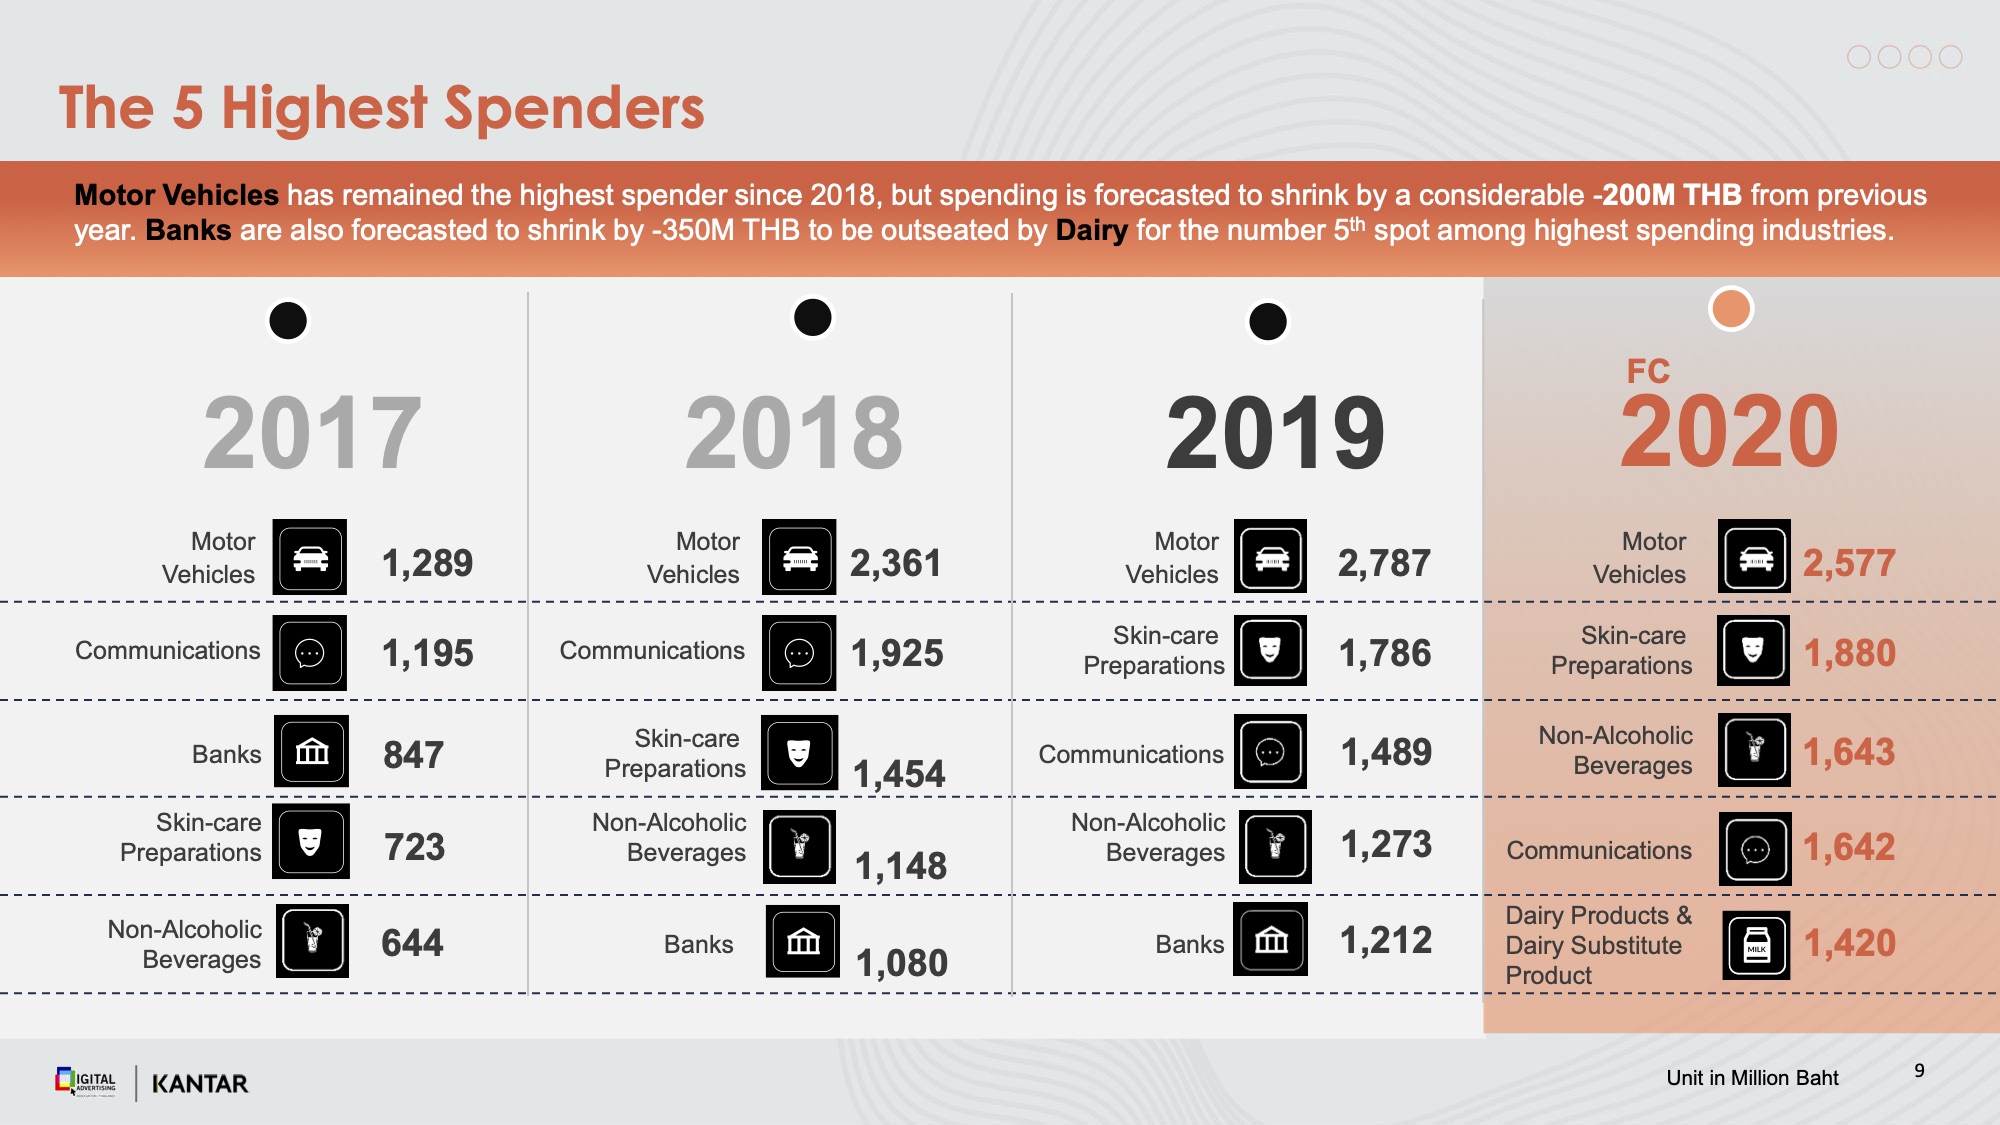  The 5 highest Ad Spenders